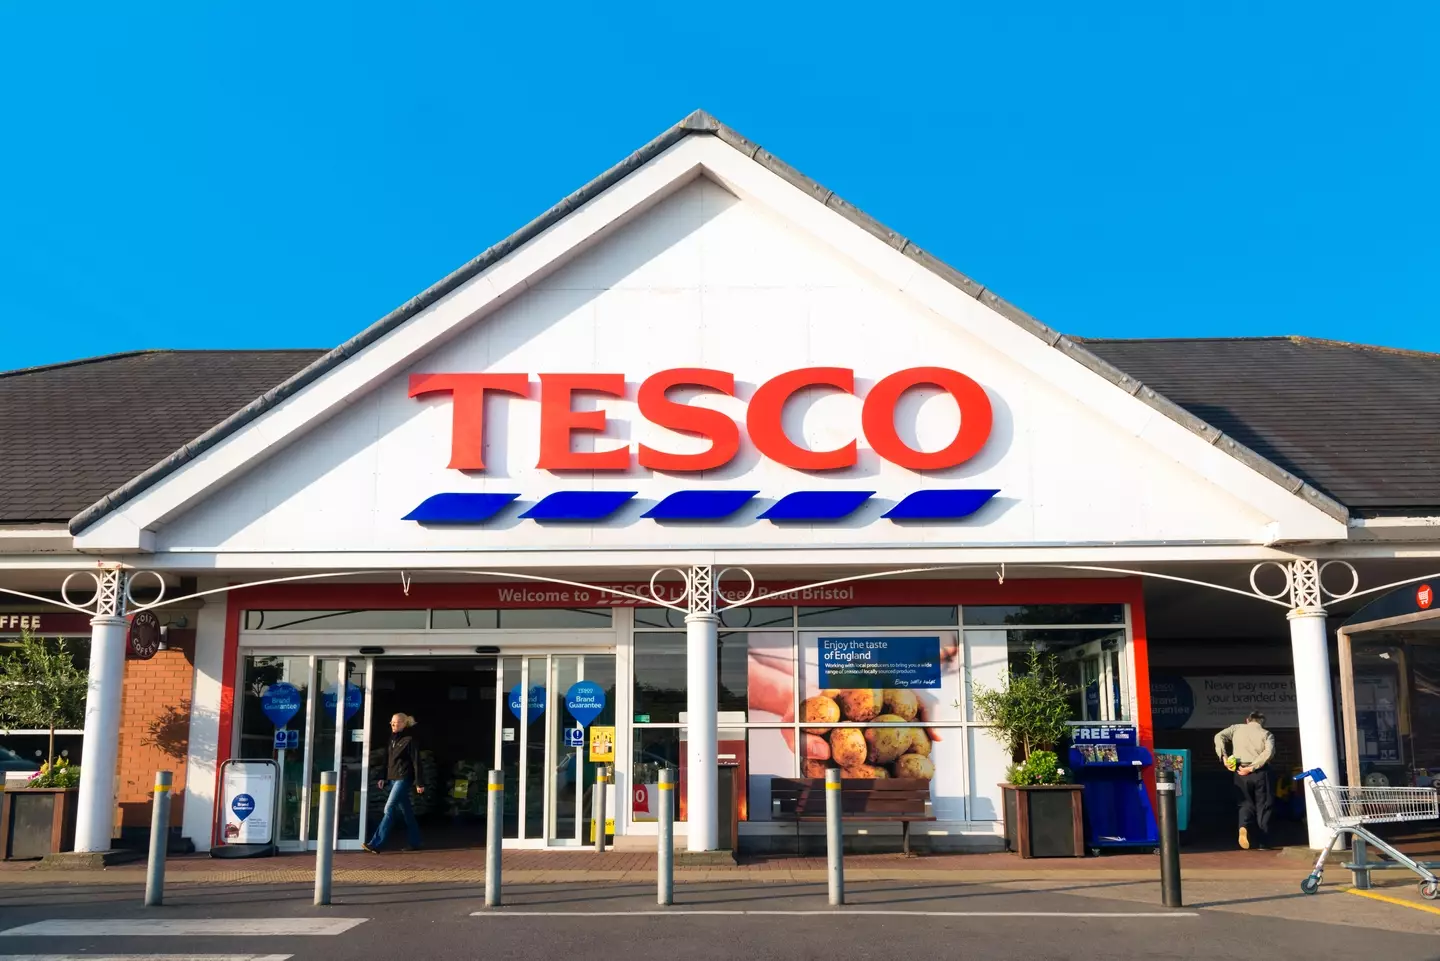 Tesco will temporarily stop selling some major pet foods including Whiskas, Dreamies and Pedigree.